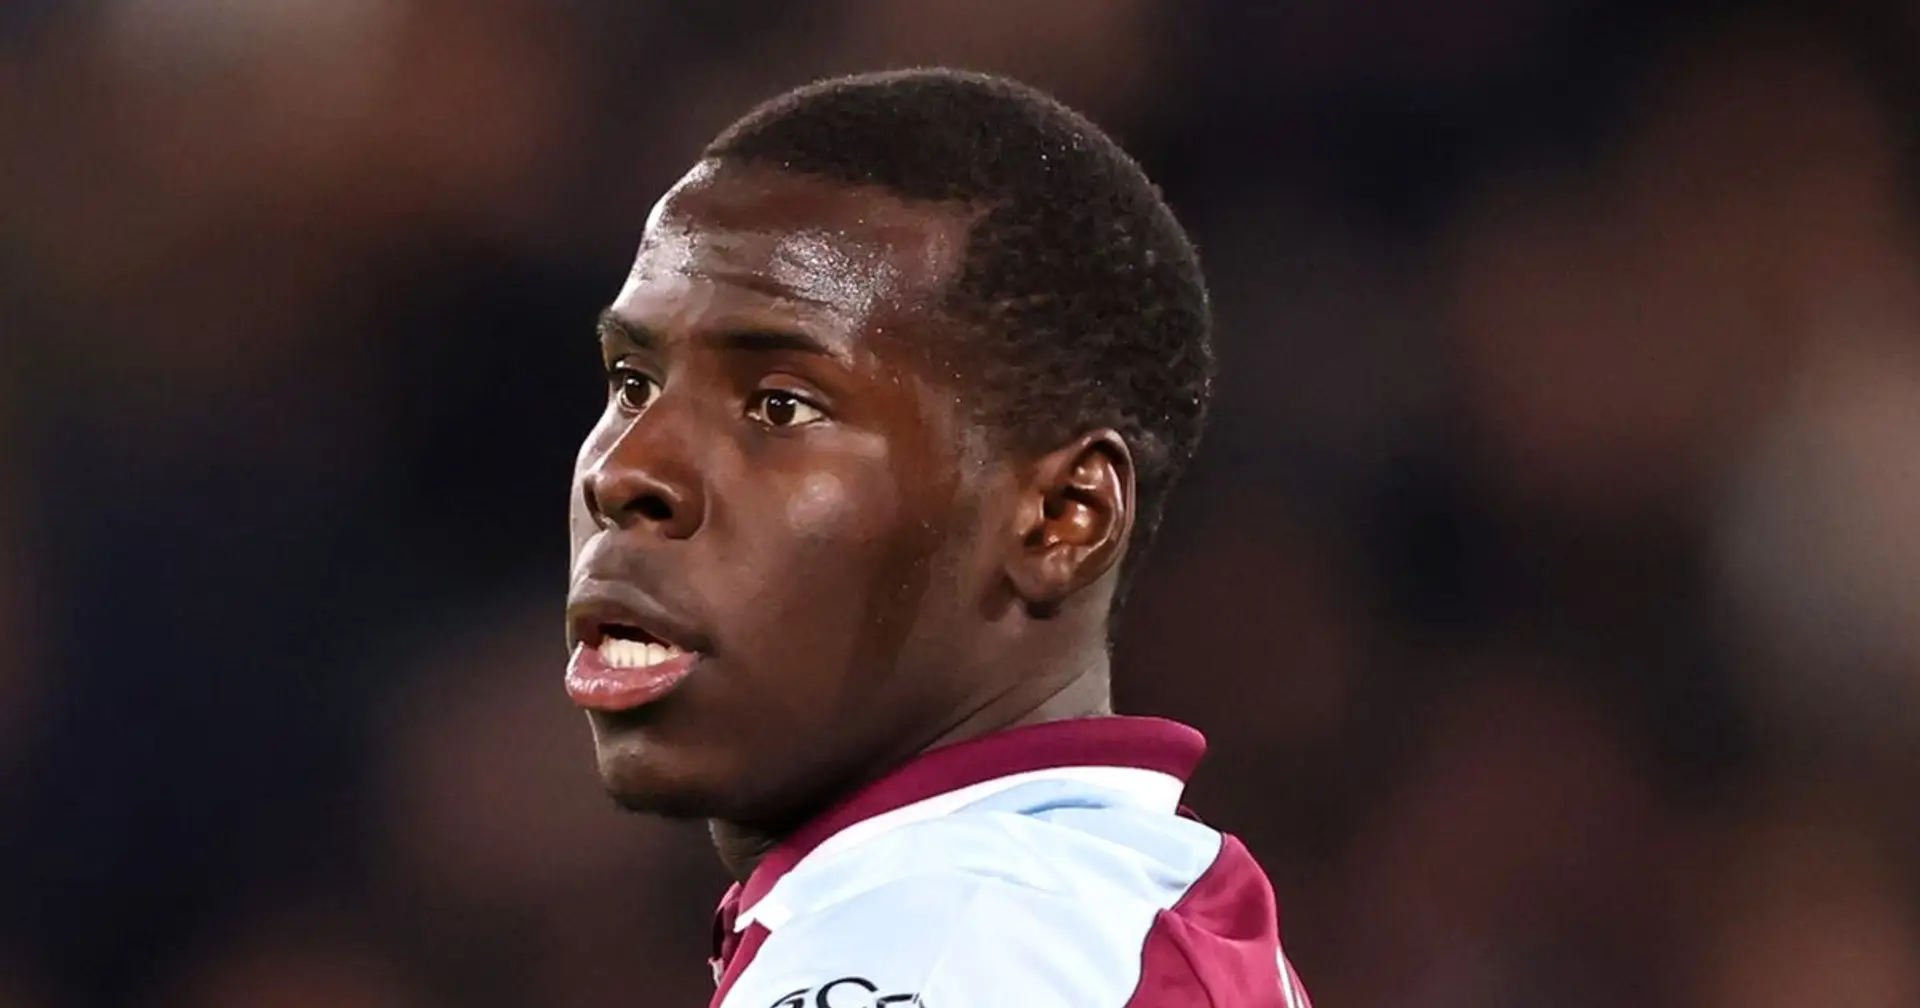 Zouma could still be jailed despite Met Police refusing to investigate cat kicking video